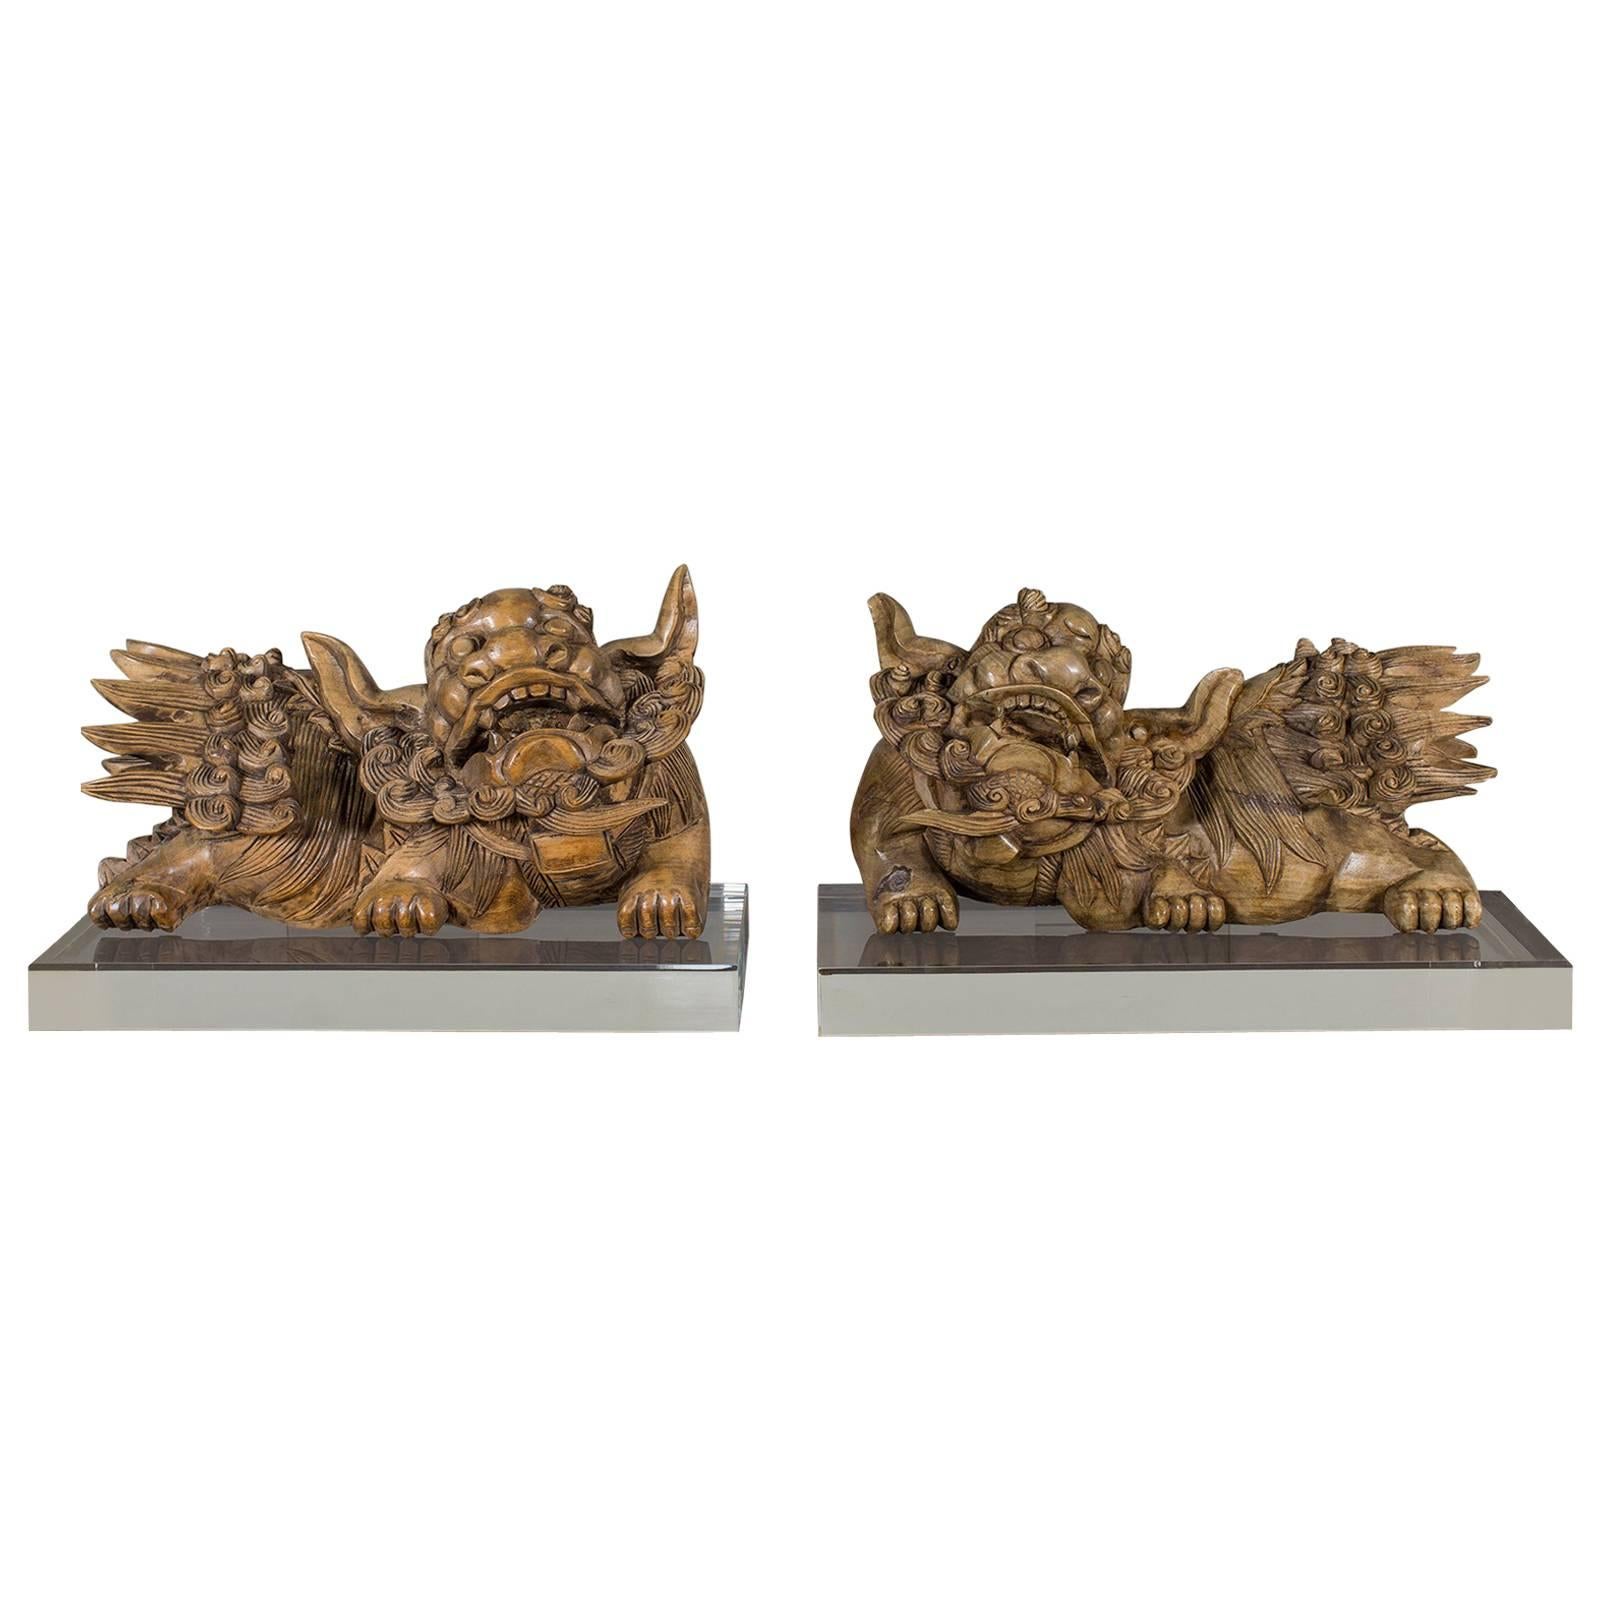 Pair of Antique Chinese Foo Guardian Lions circa 1875 on Custom Lucite Stands